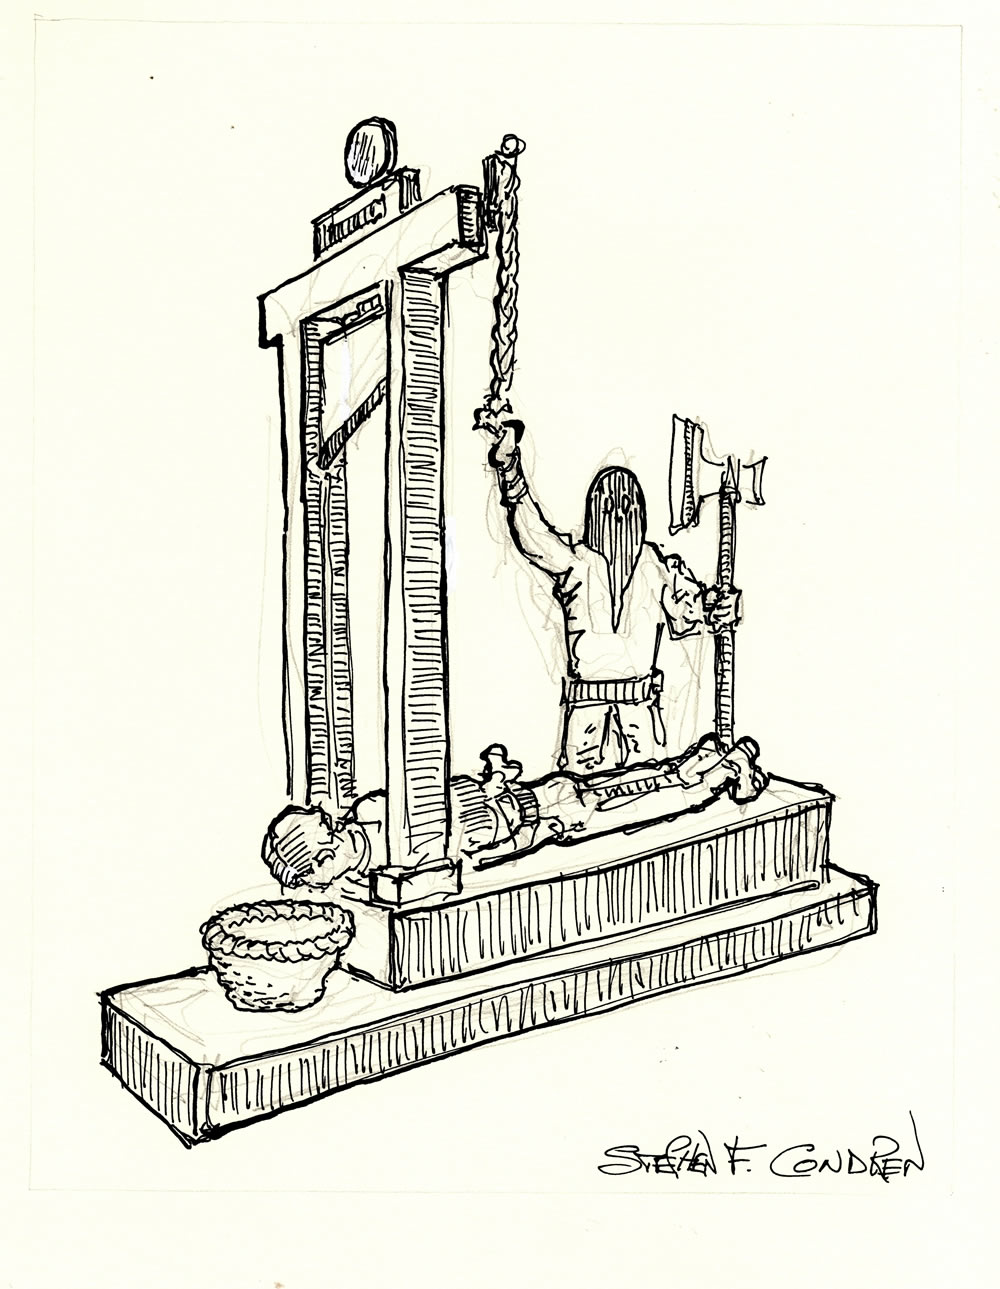 Pen & ink drawing of a guillotine. This has been the instrument of death for BDSM villains of gay men.